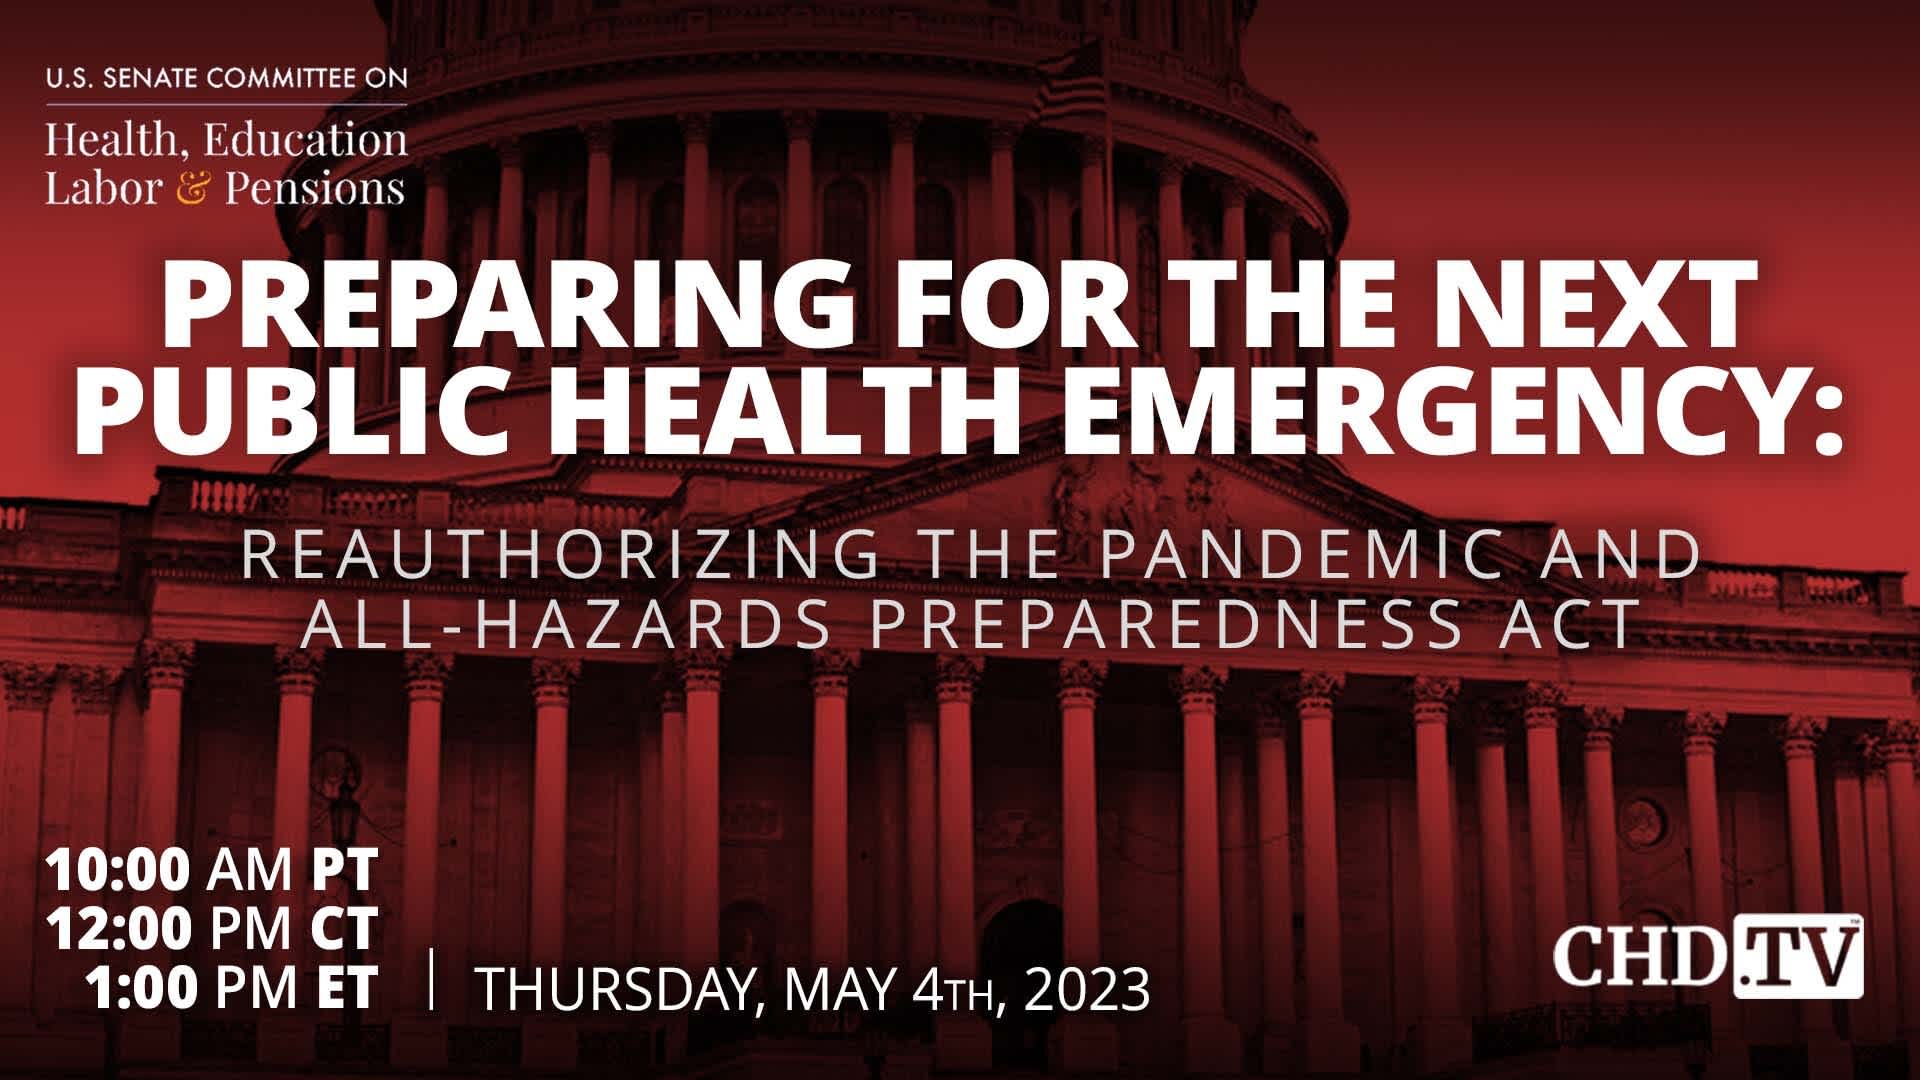 Preparing for the Next Public Health Emergency: Reauthorizing the Pandemic and All-Hazards Preparedness Act | US Senate | May 4th, 2023